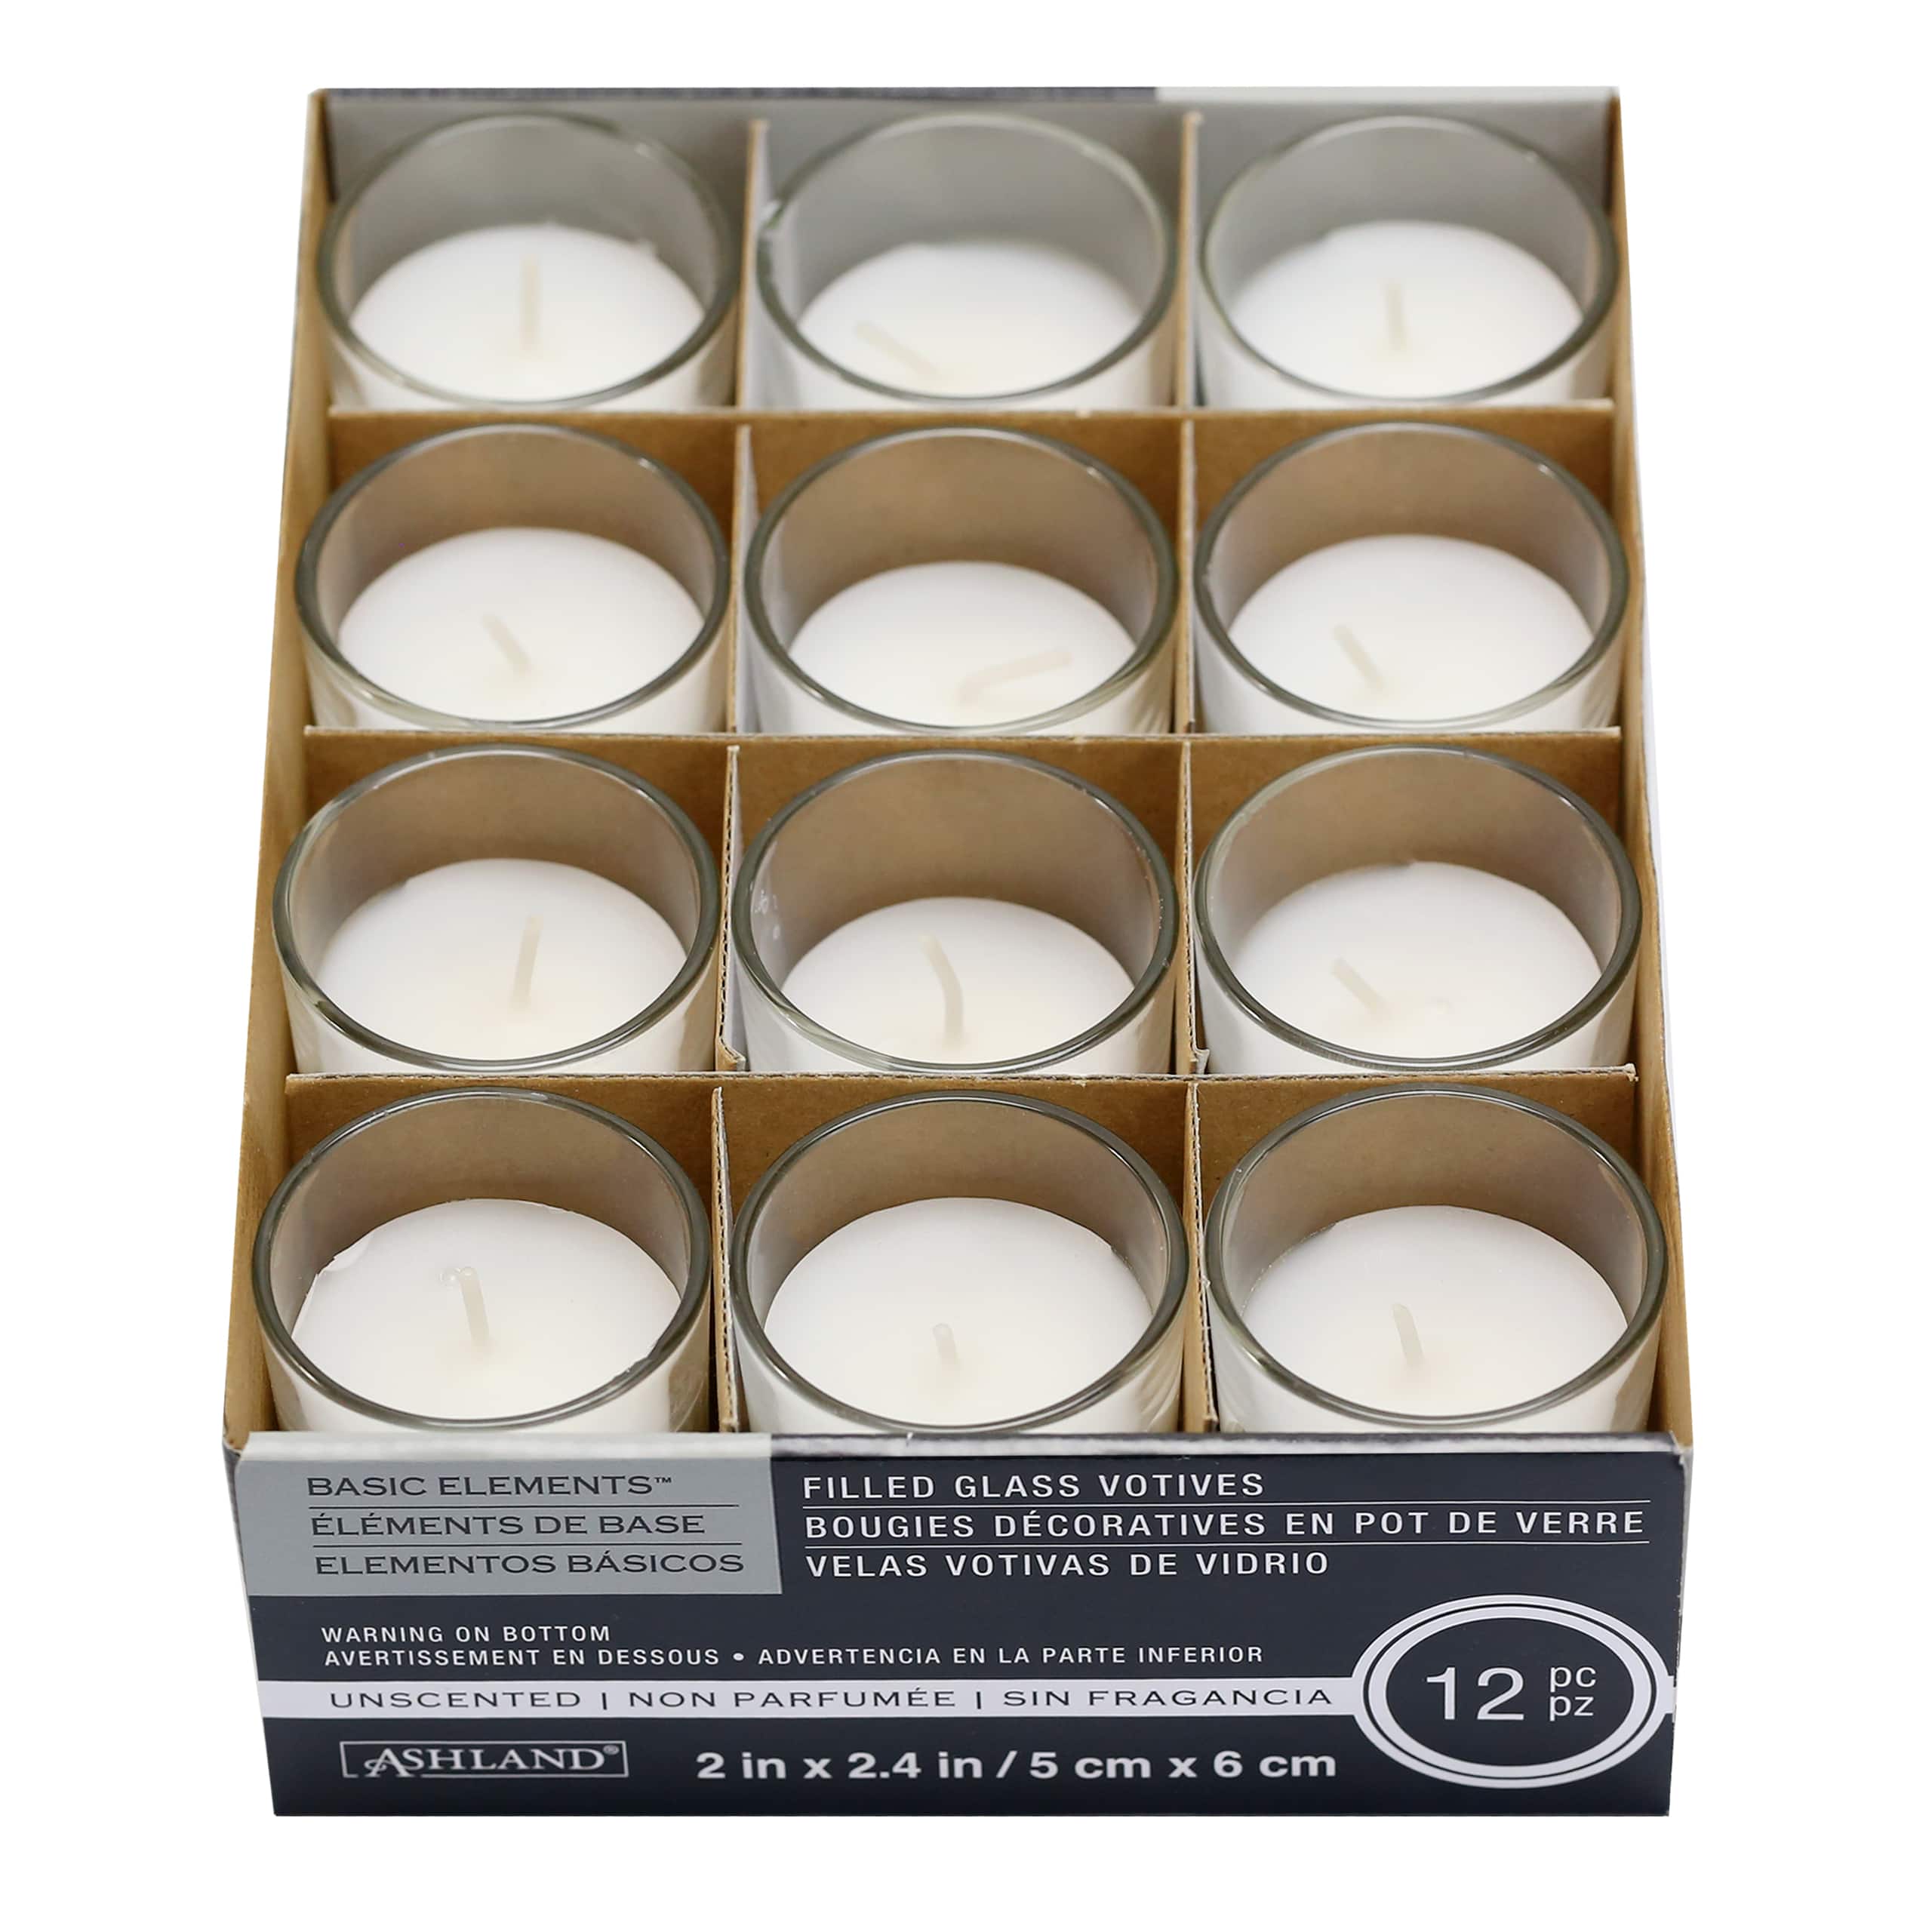 100 Count Unscented White Tea Light Candles 0.32 oz Each 